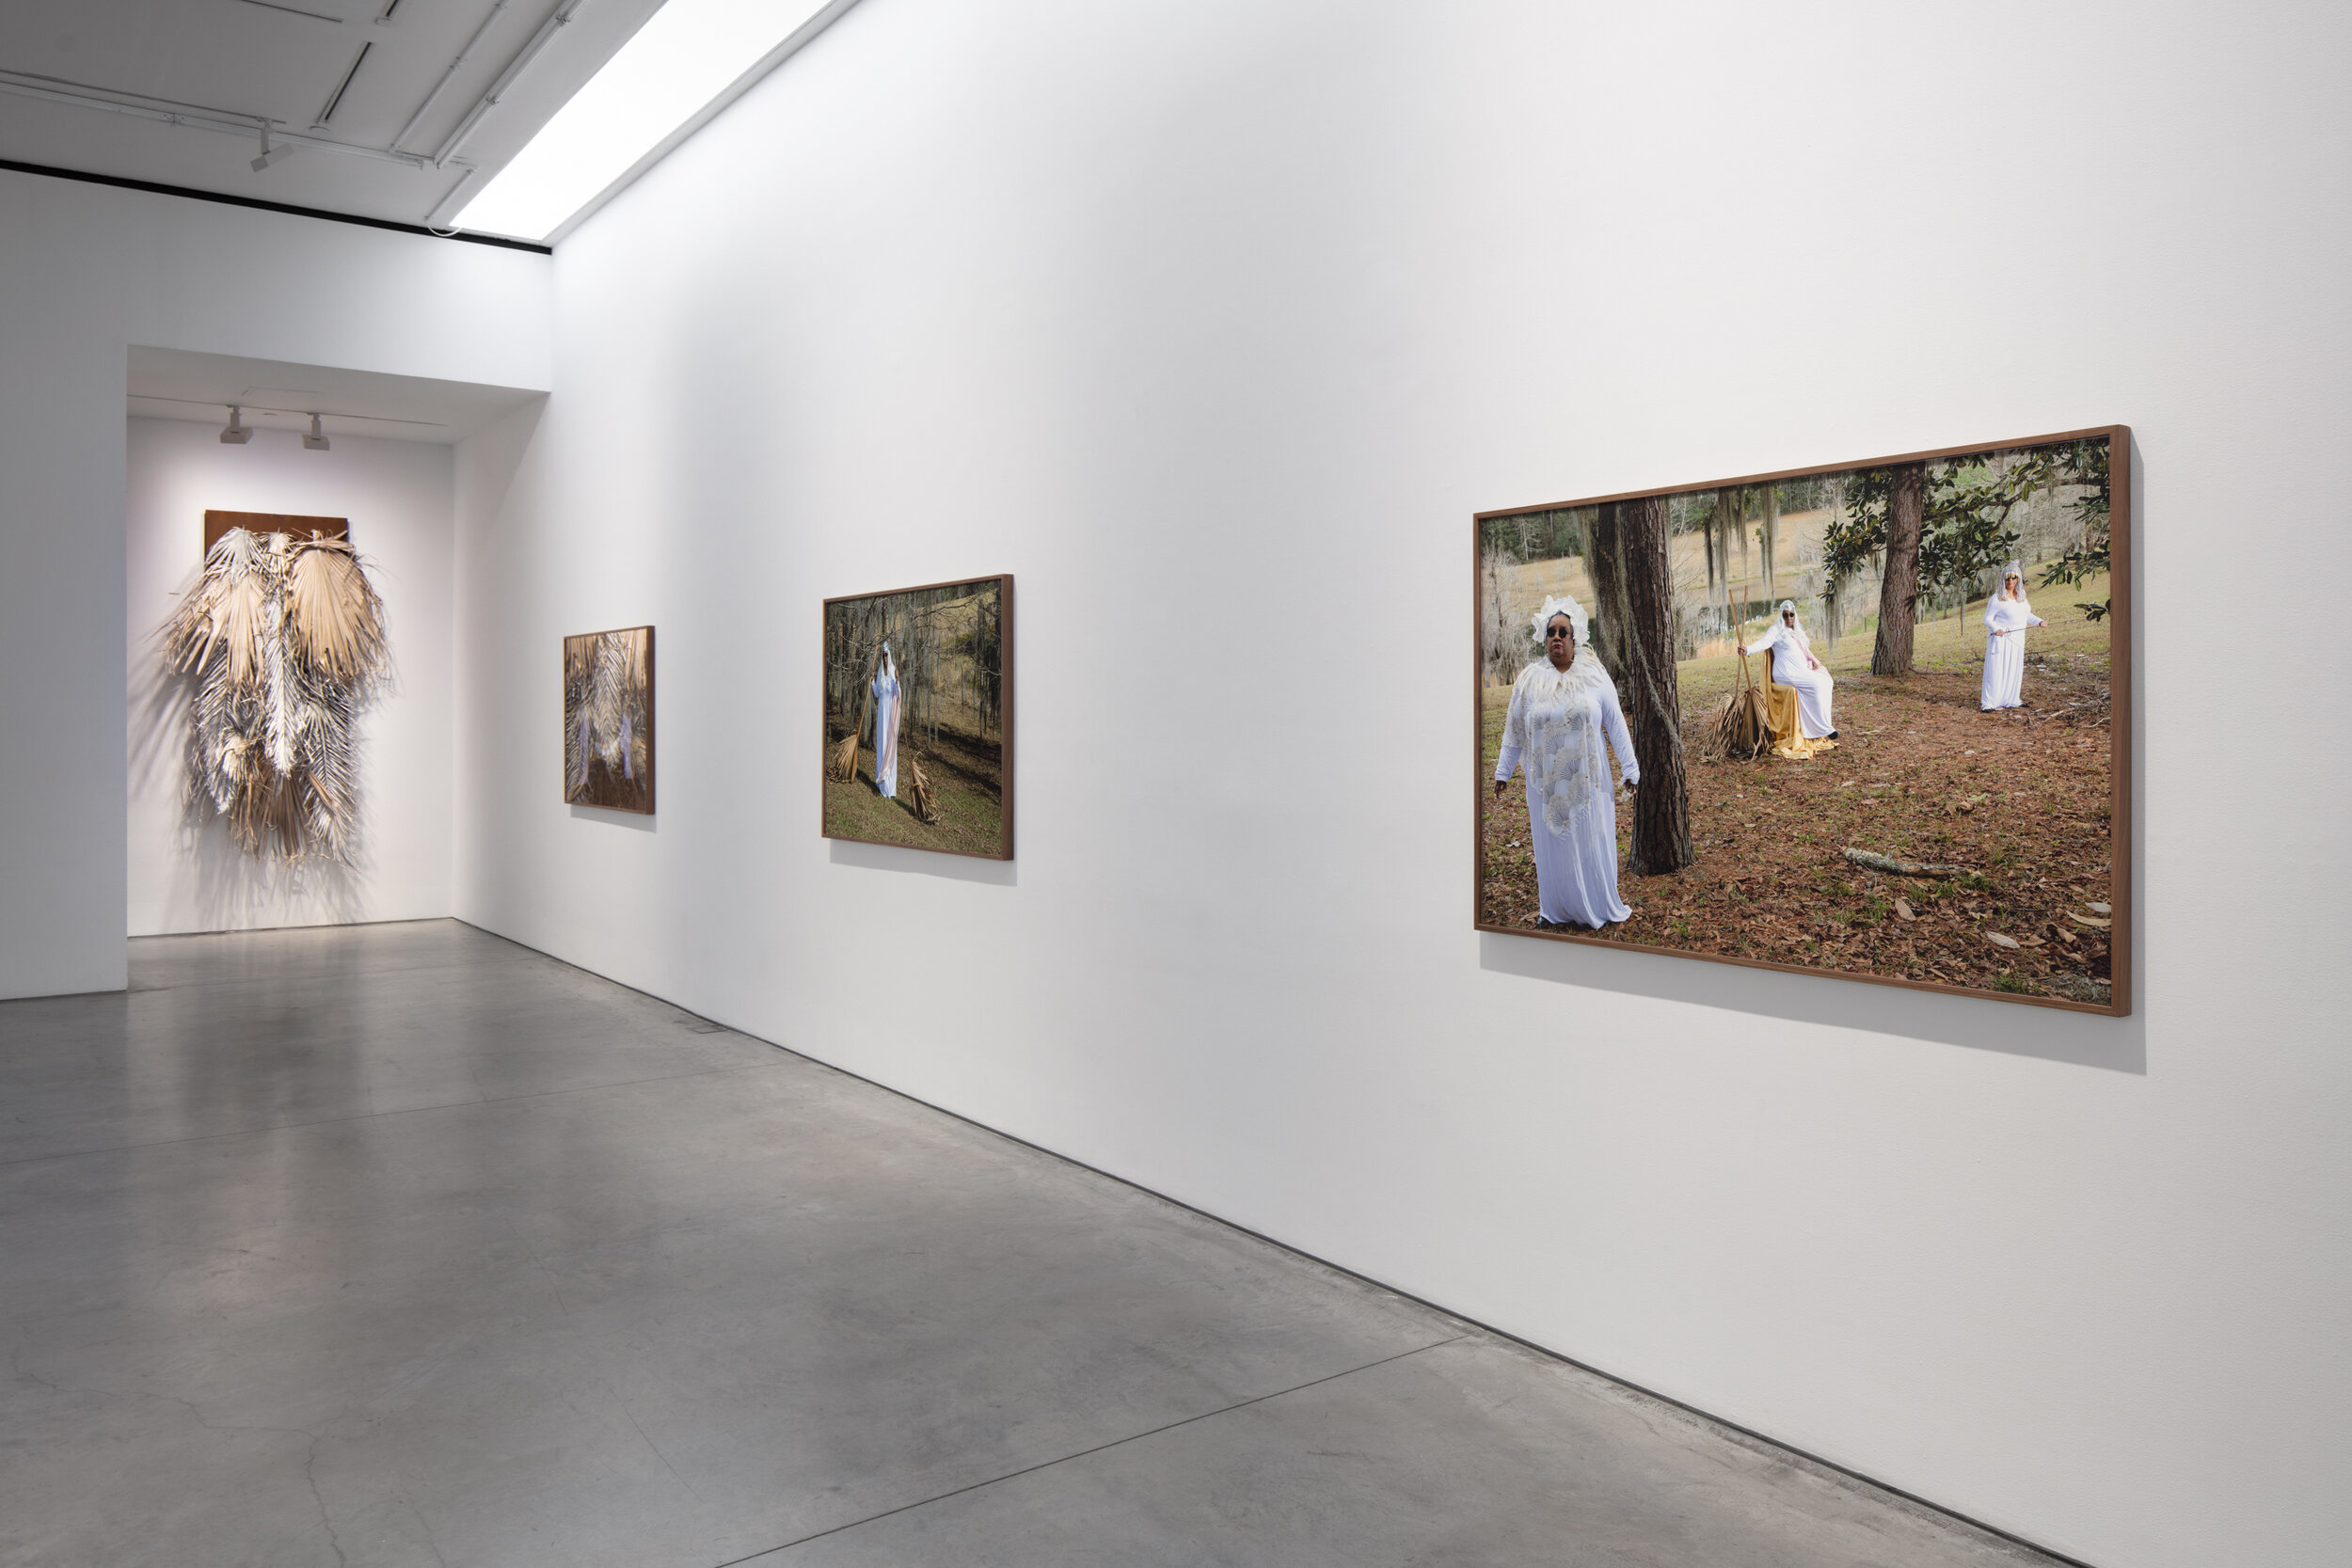  Installation View,  A Romance of Paradise .  On view March 27 – April 24, 2021 at Marianne Boesky Gallery, New York, NY. 